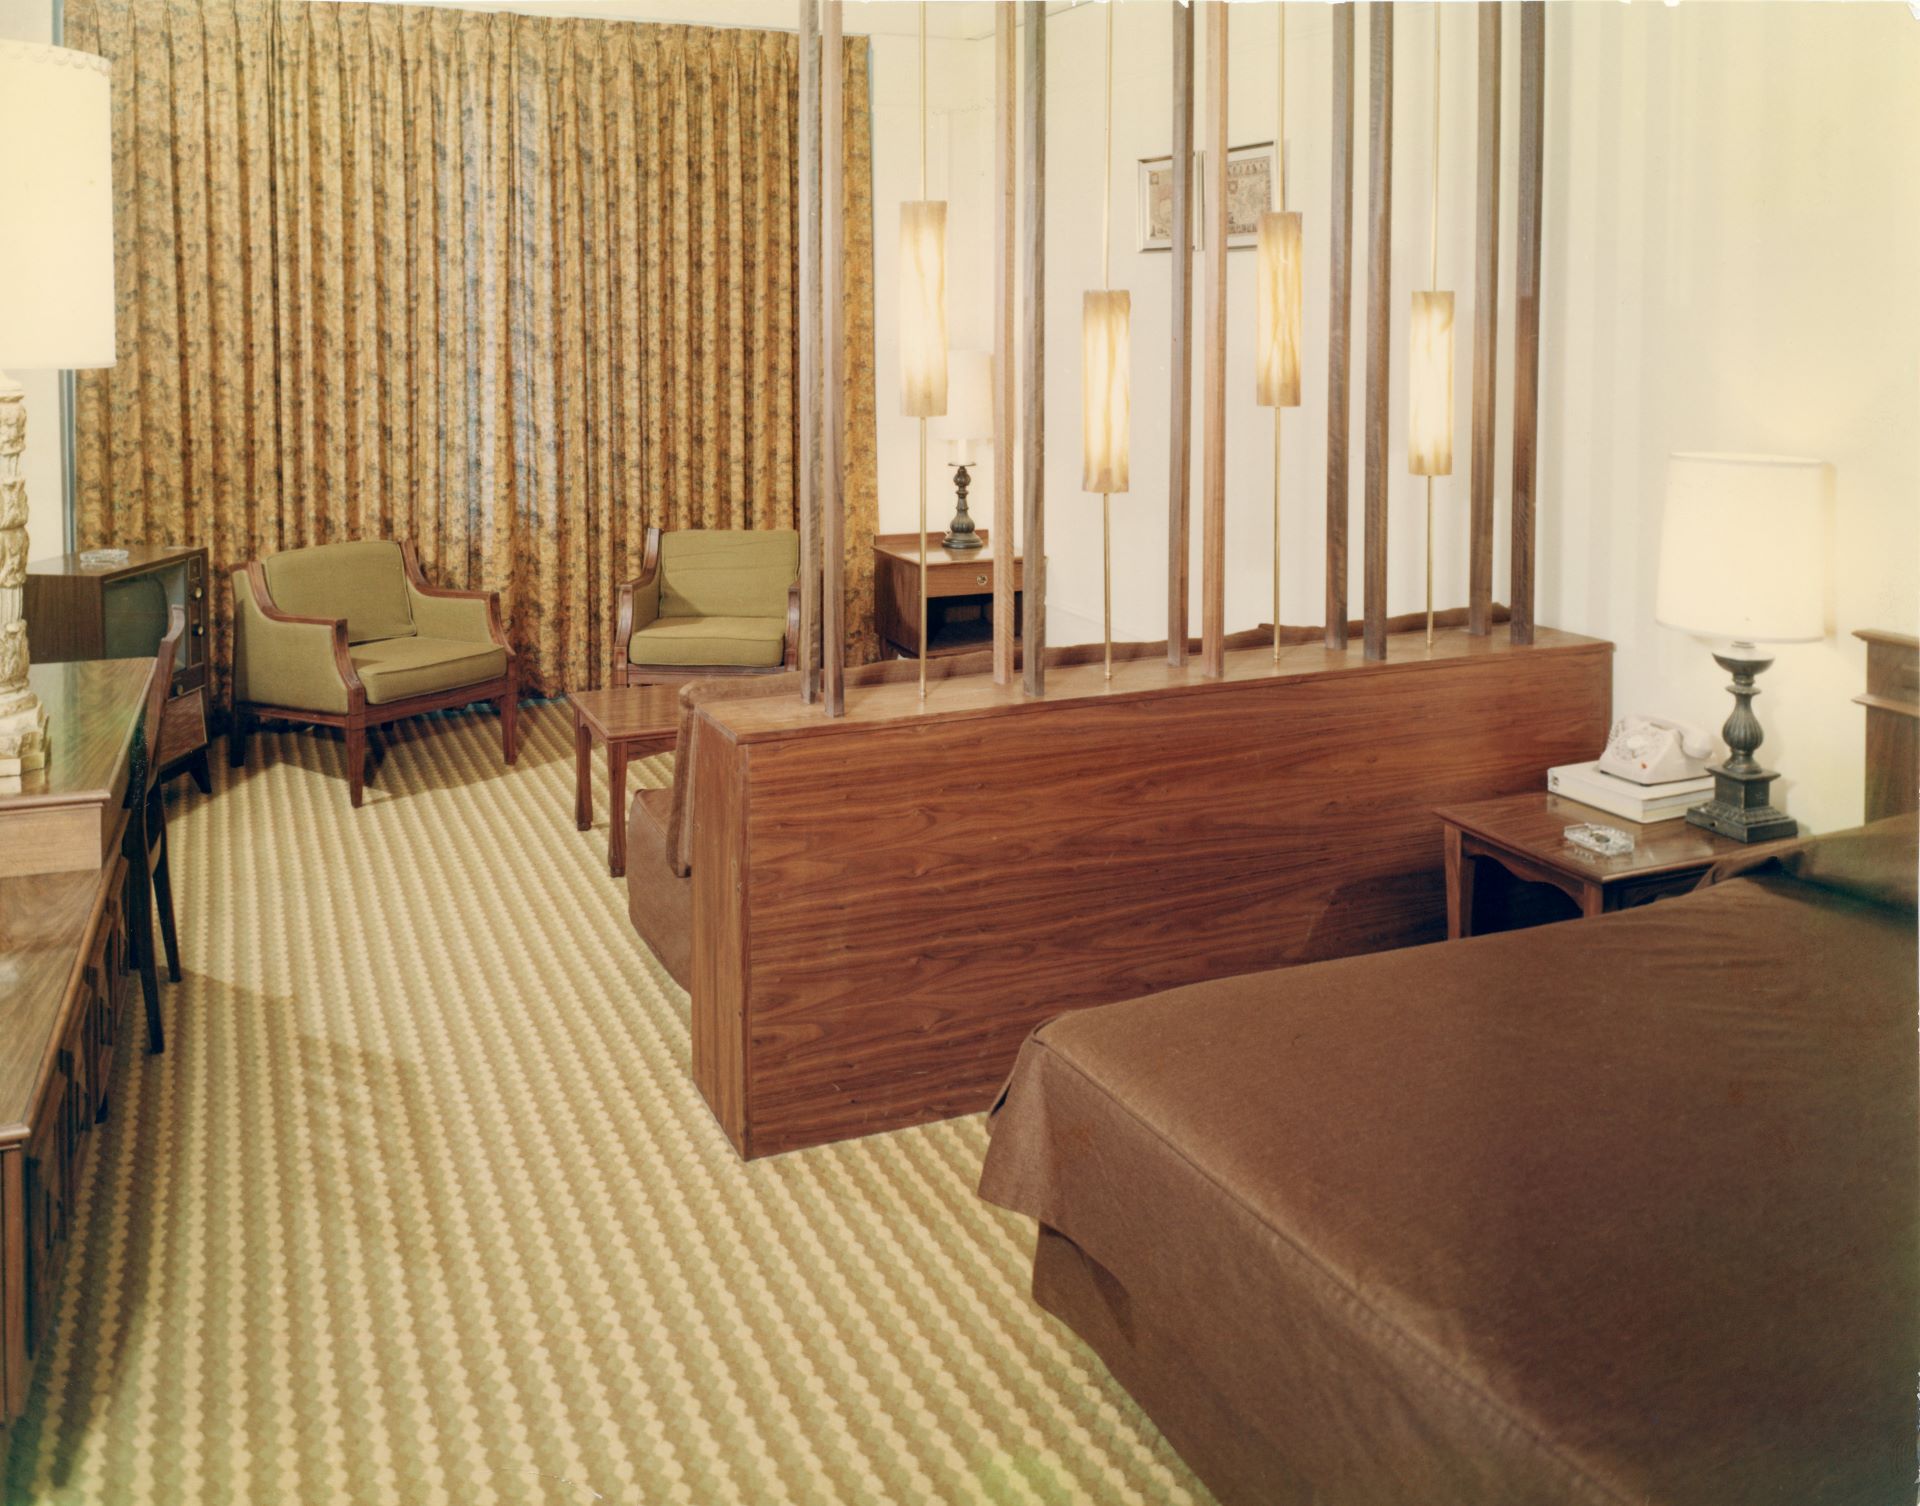 Hotel Vancouver 1970 mid-century modern guest room design and decor